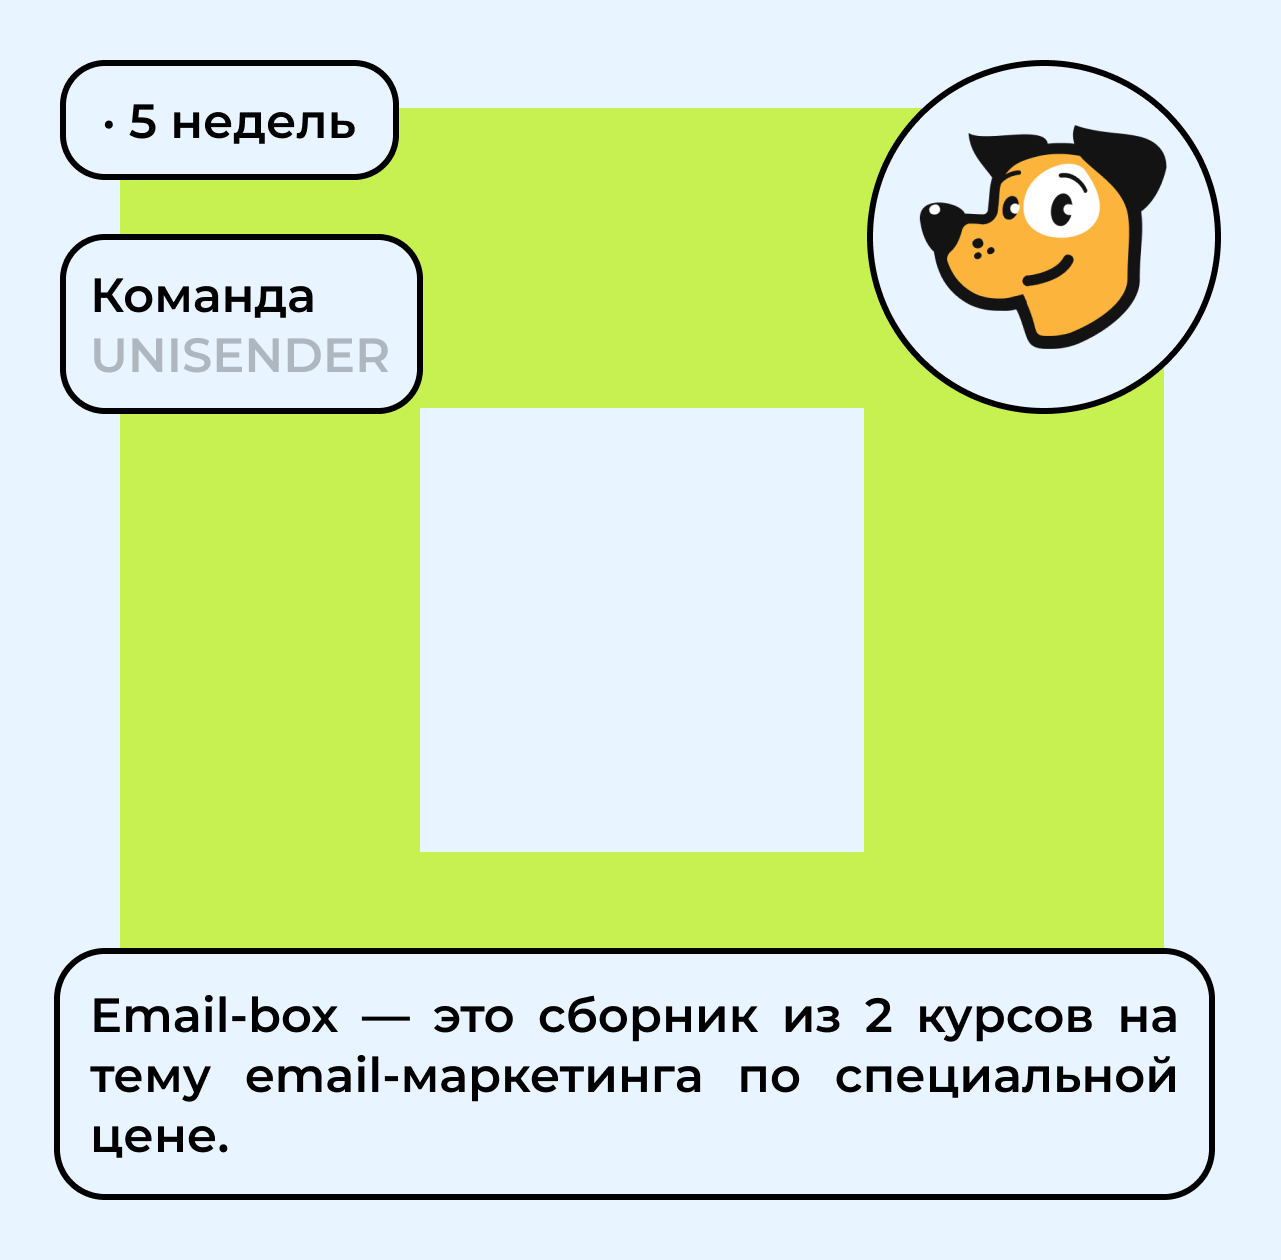 Email-box